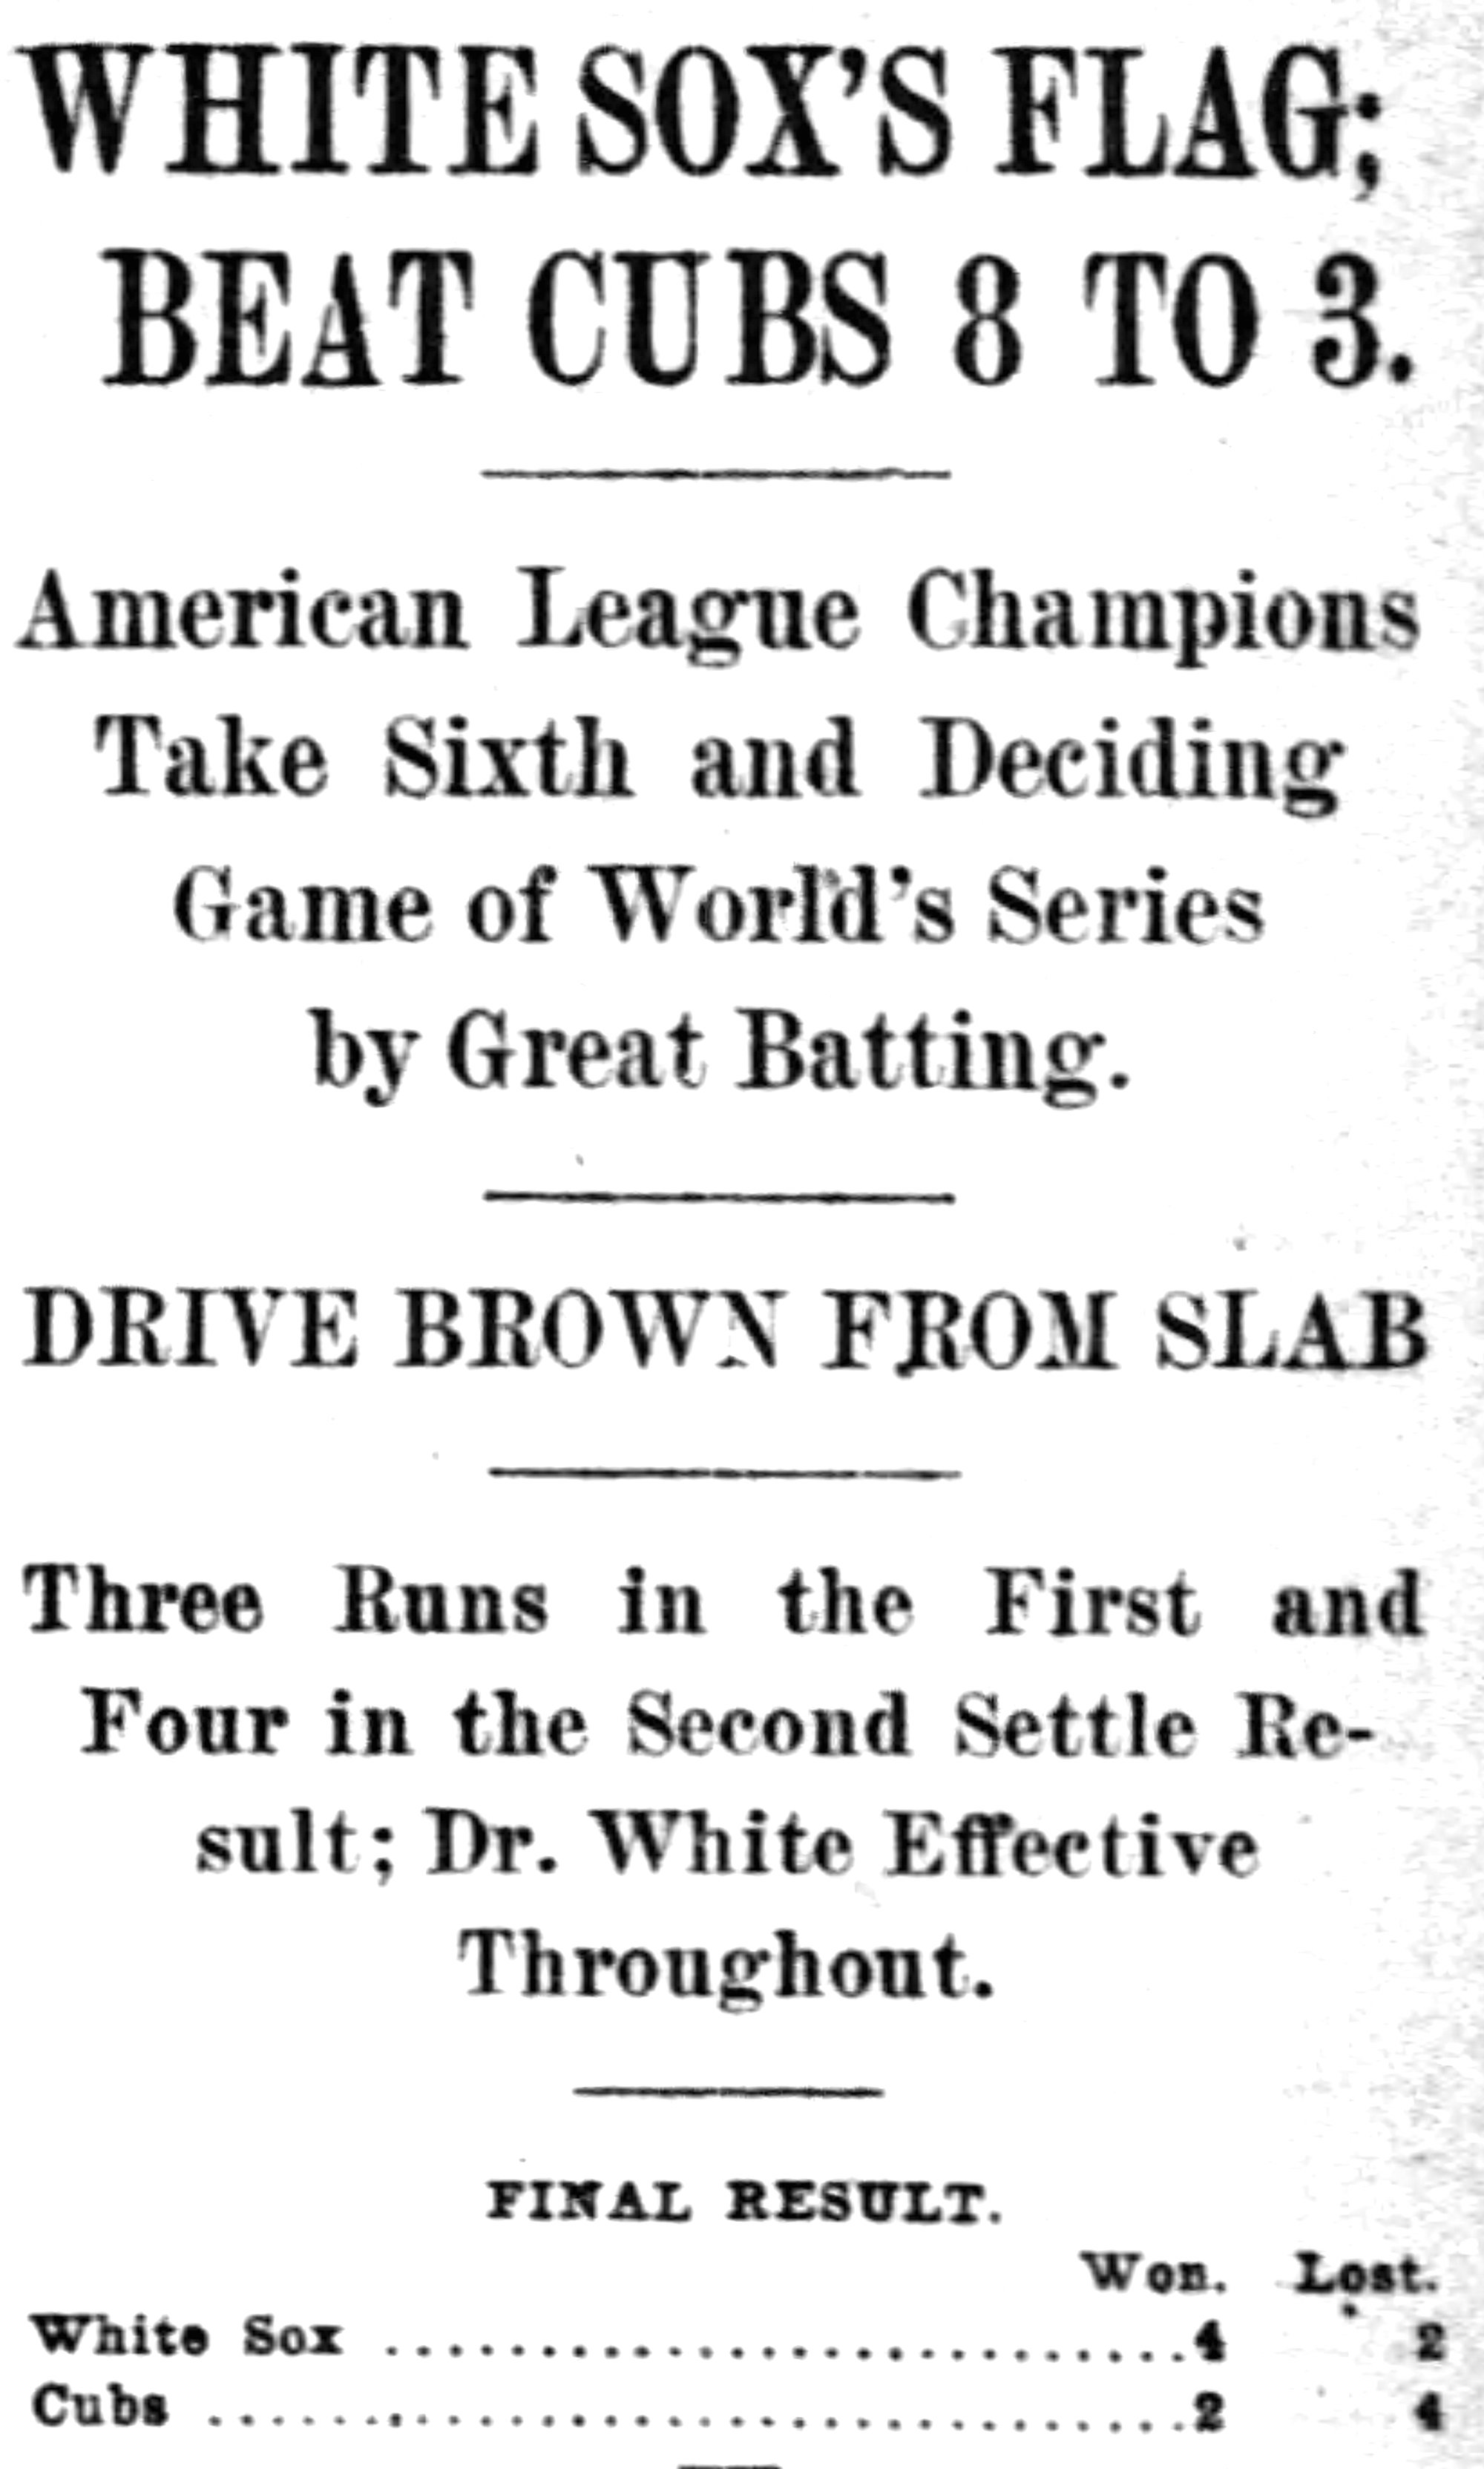 1906 World Series Game 3: White Sox @ Cubs 